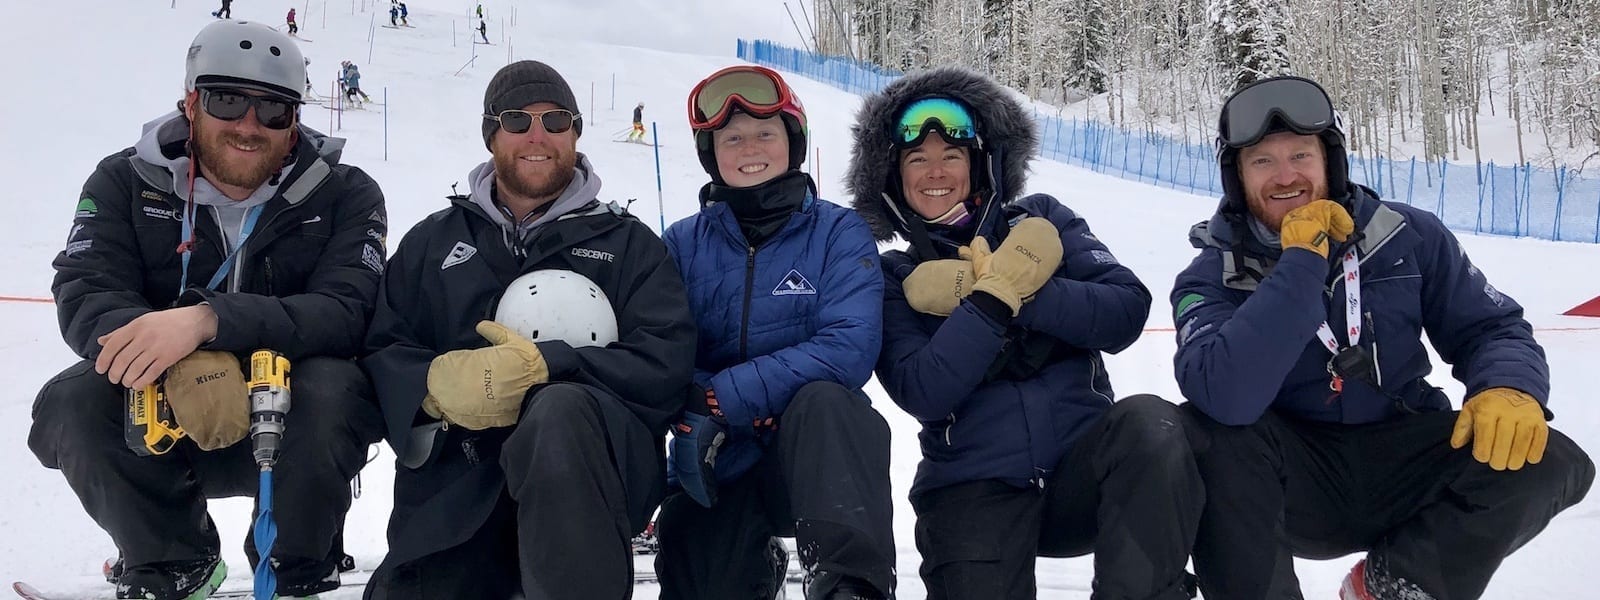 Vail racer fights cancer while giving back